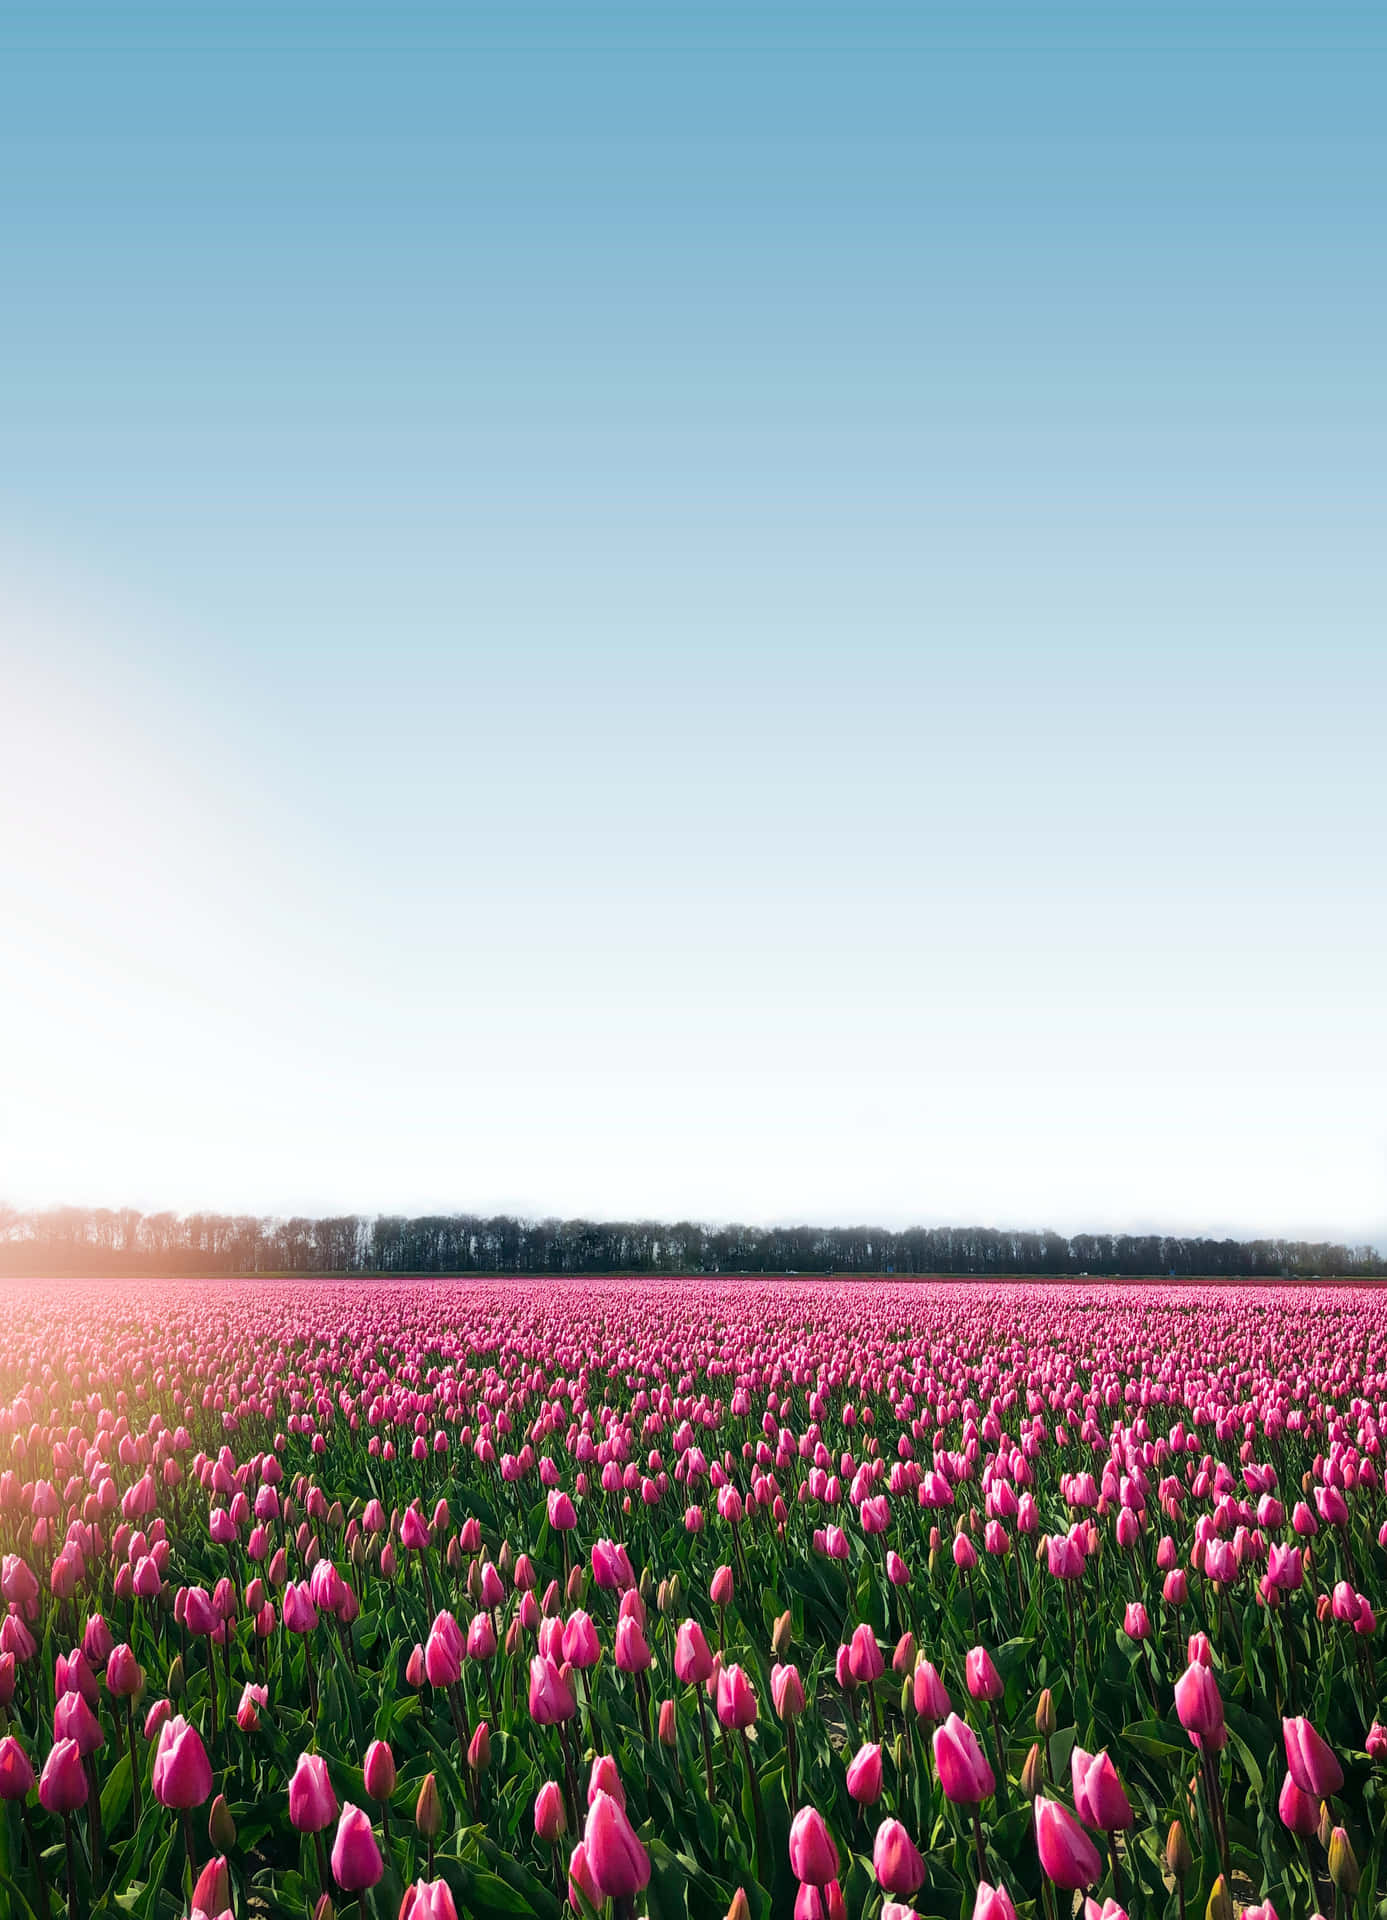 Add Color to Your Life with the Beautiful Flower Field